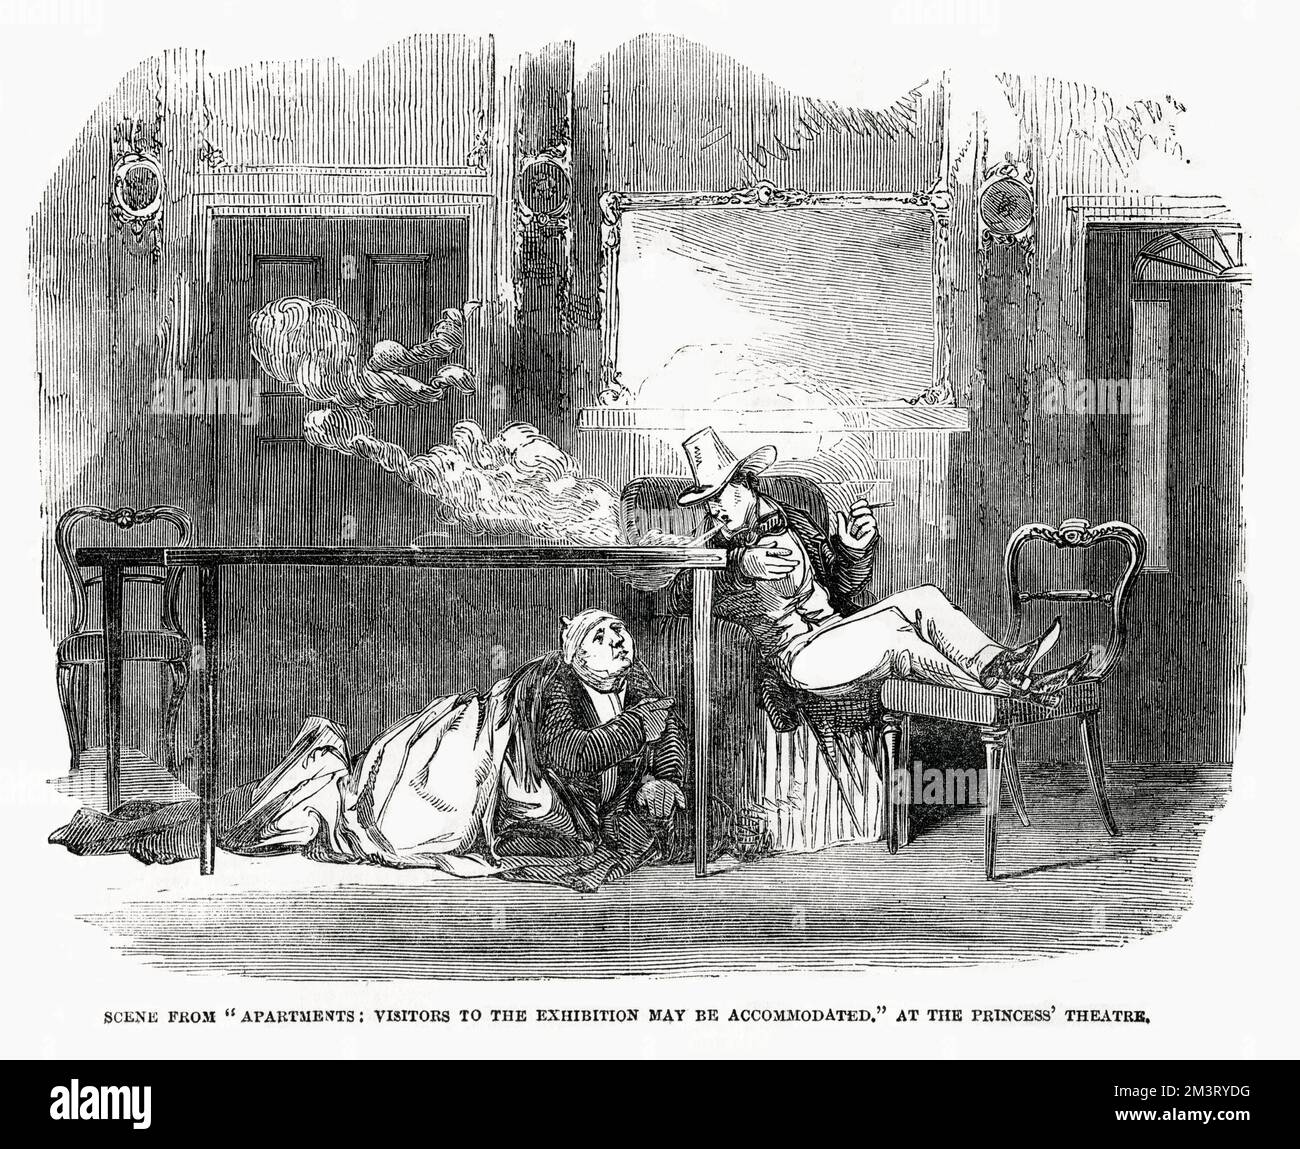 Scene from 'Apartments: Visitors to the Exhibition may be accomodated' by William Brough at the Princess' Theatre.     Date: 1851 Stock Photo